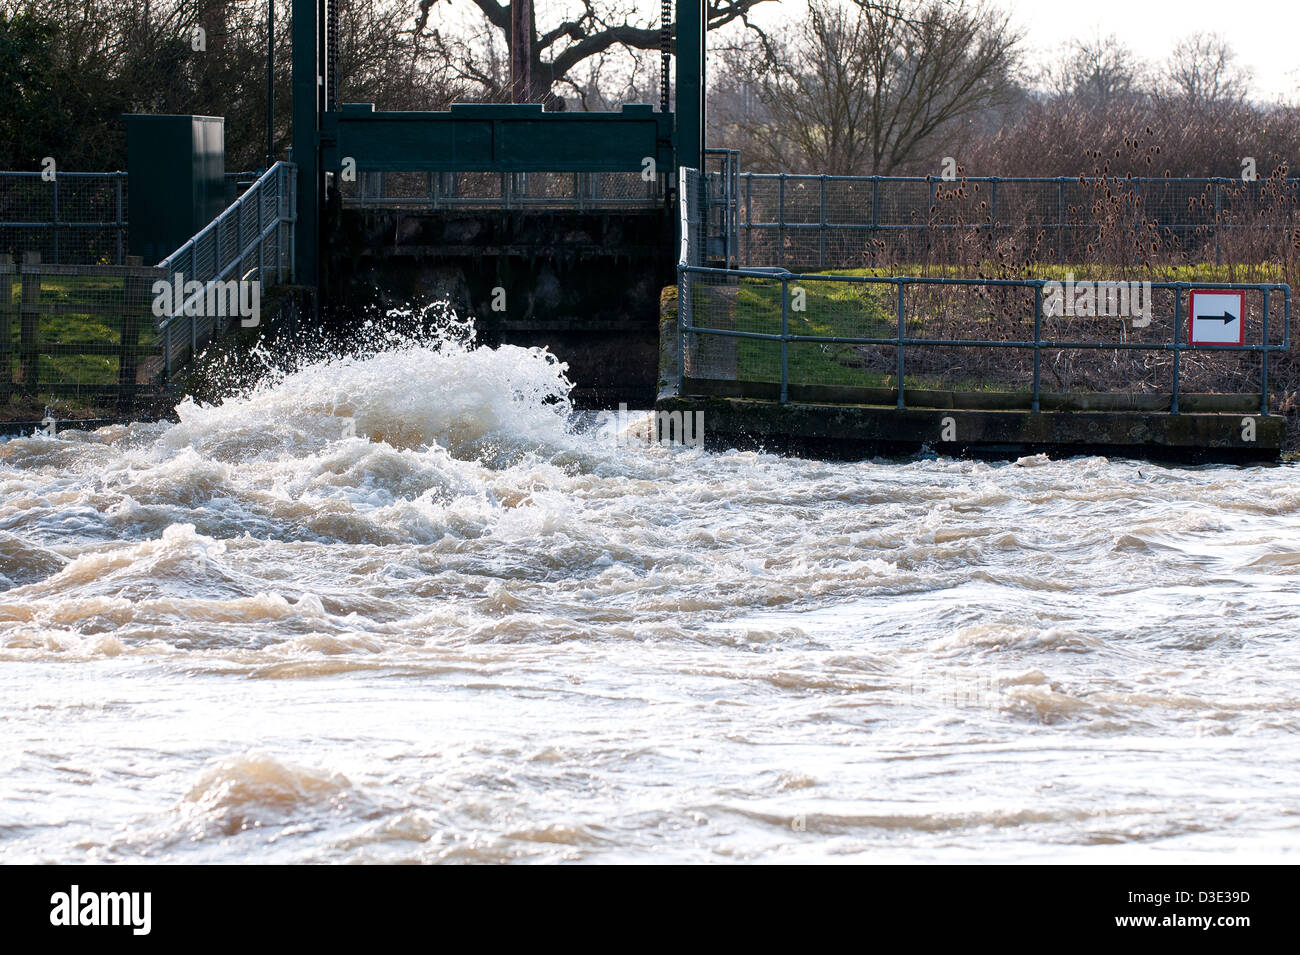 The sluice gate at Alwalton lock near Peterborough opened during heavy flood river flow. Stock Photo